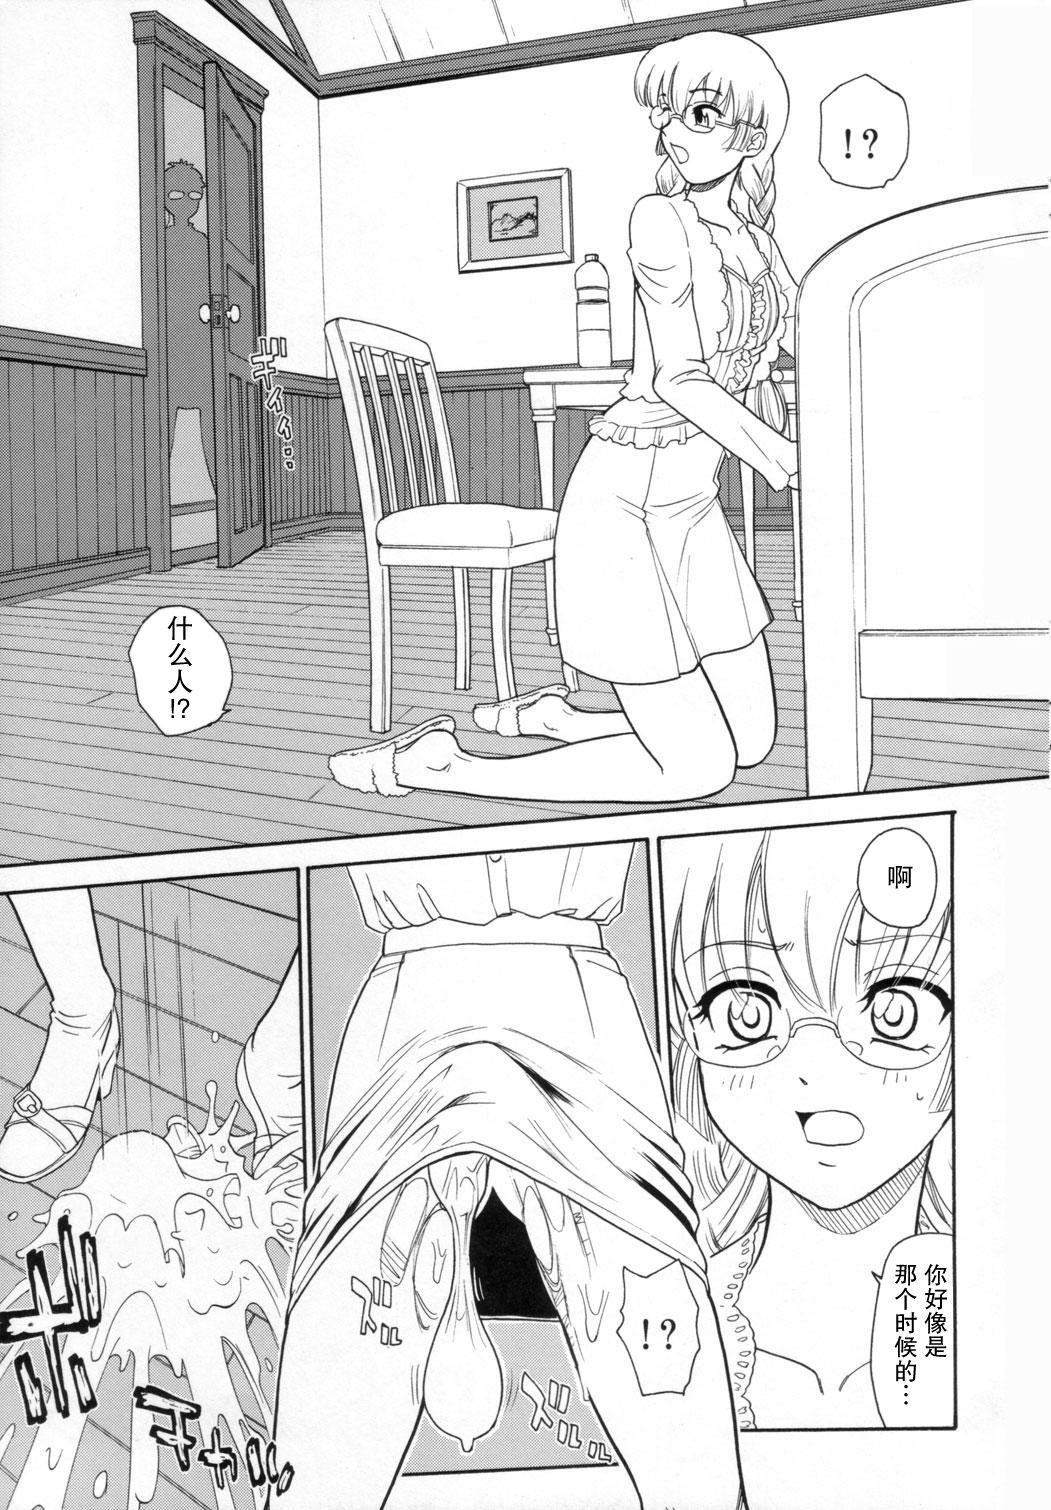 (C72) [Behind Moon (Q)] Dulce Report 9 | 达西报告 9 [Chinese] [哈尼喵汉化组] [Decensored] page 11 full